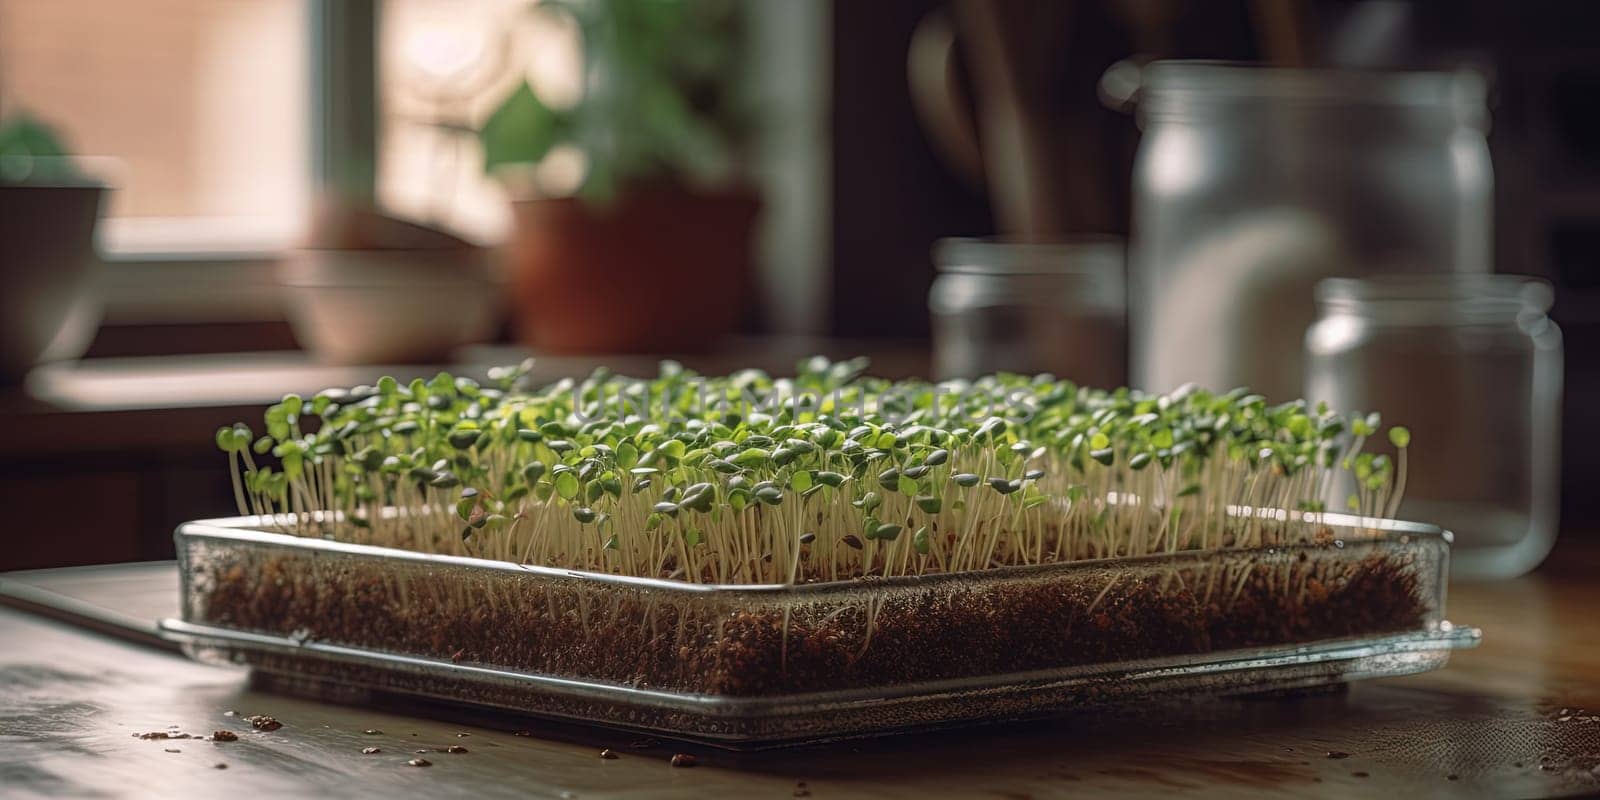 Growing micro green sprouts in glass container on a table, healthy organic farm in the kitchen